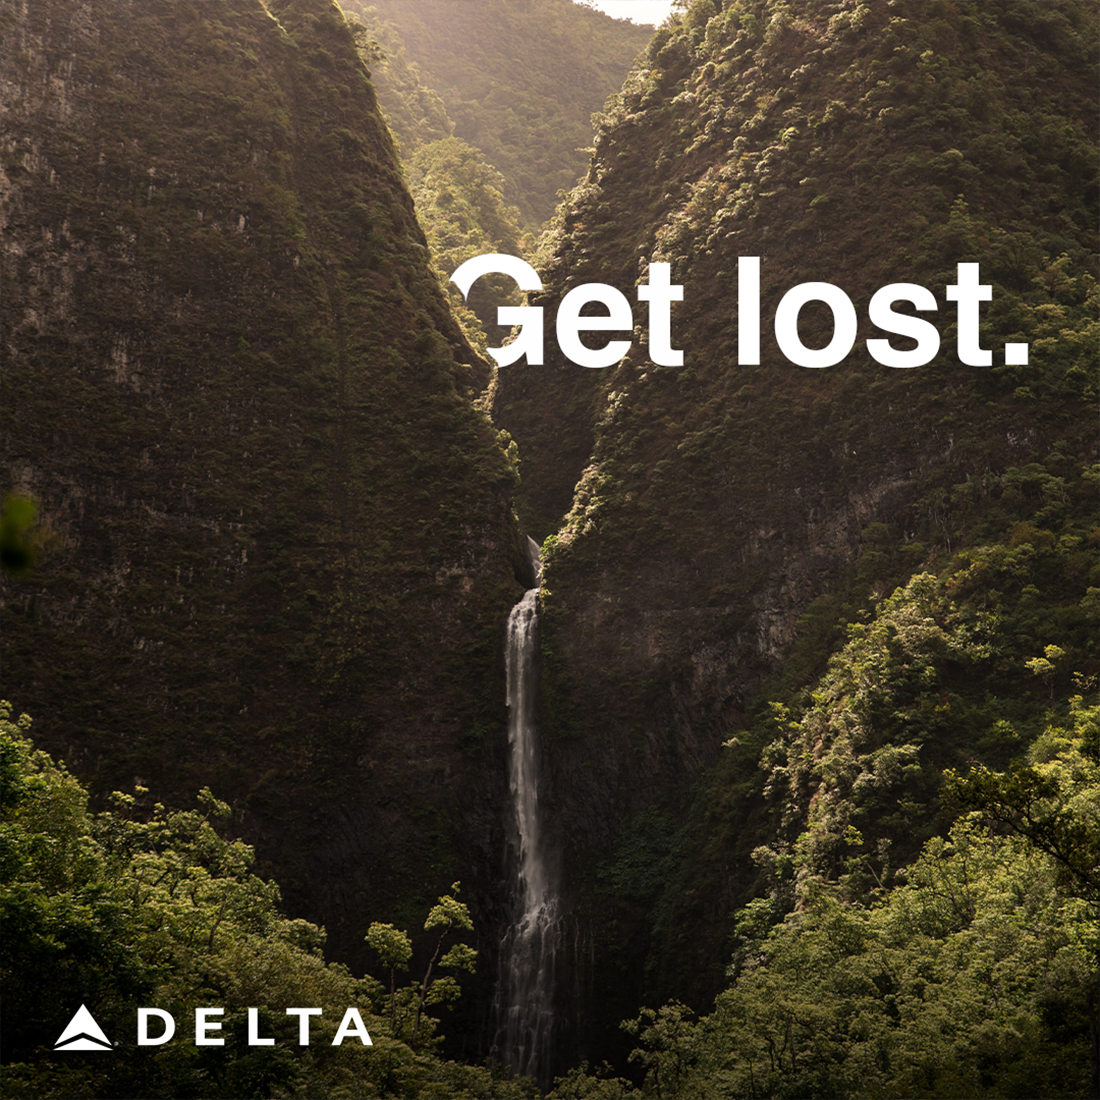 Advertising - Delta Airlines “Get Lost” Campaign - Image 5